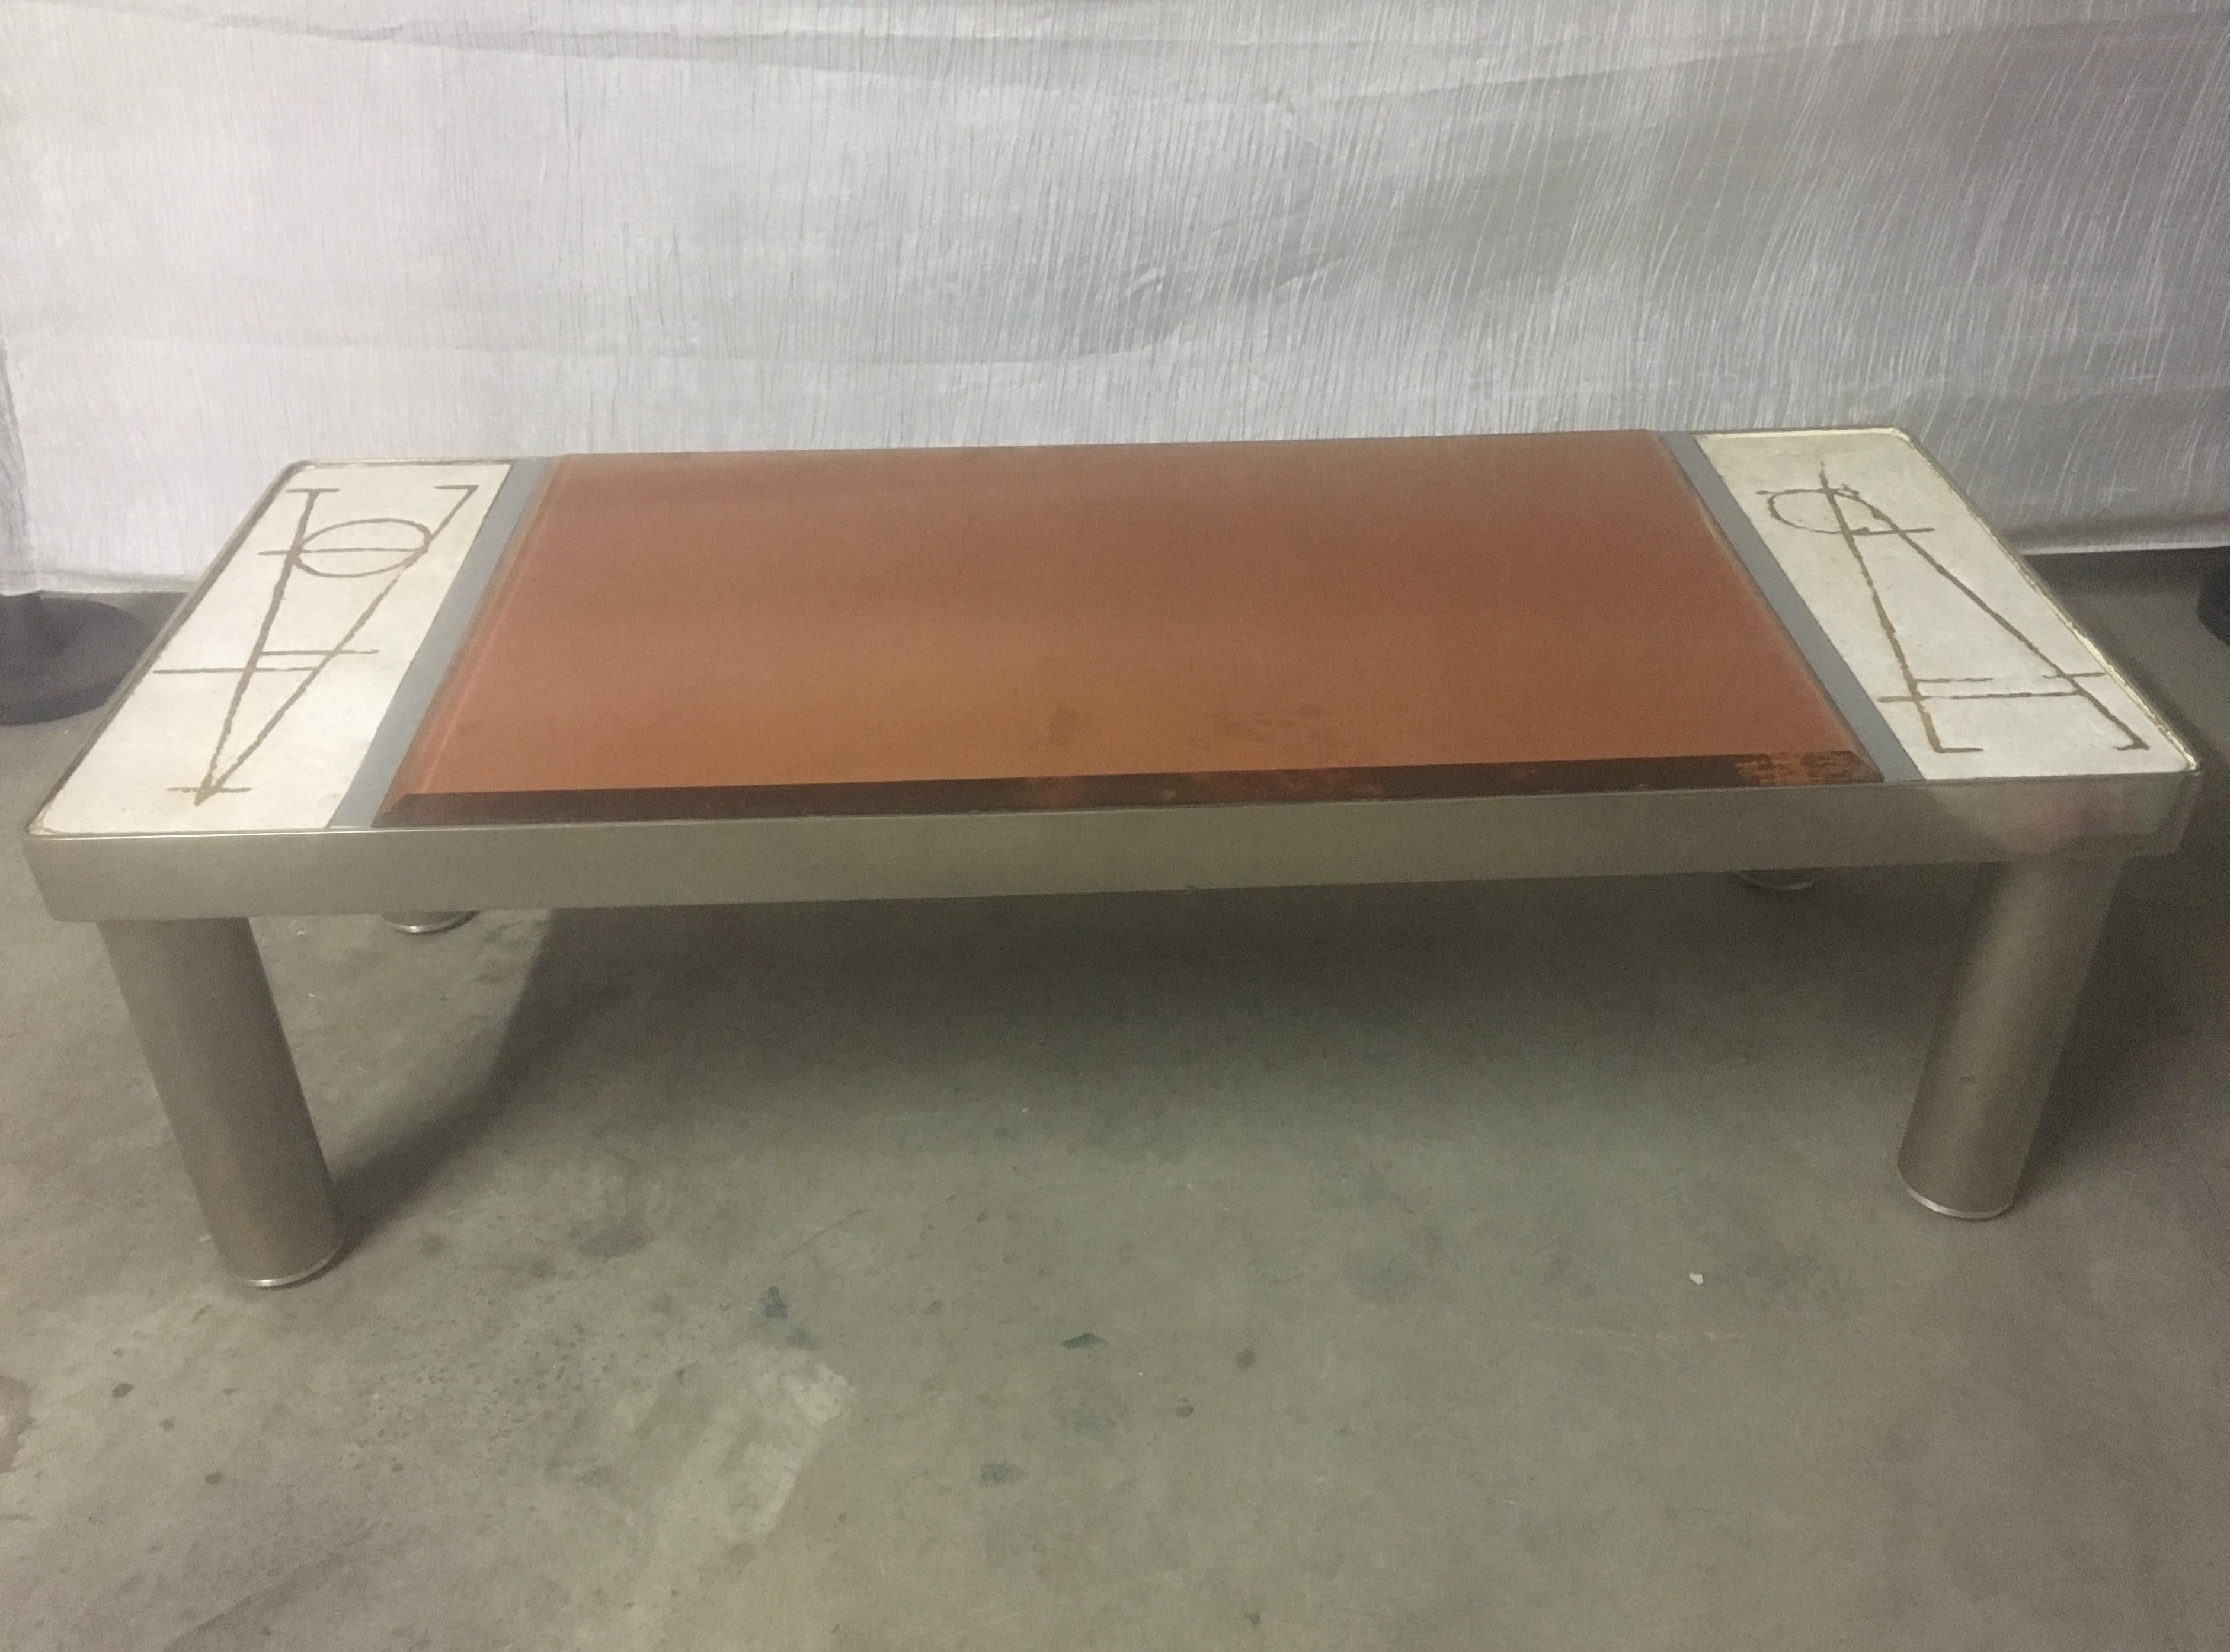 Late 20th Century Ceramic and Chromed Metal Rectangular Coffee Table, Brown Glass Slab Top, 1970s For Sale